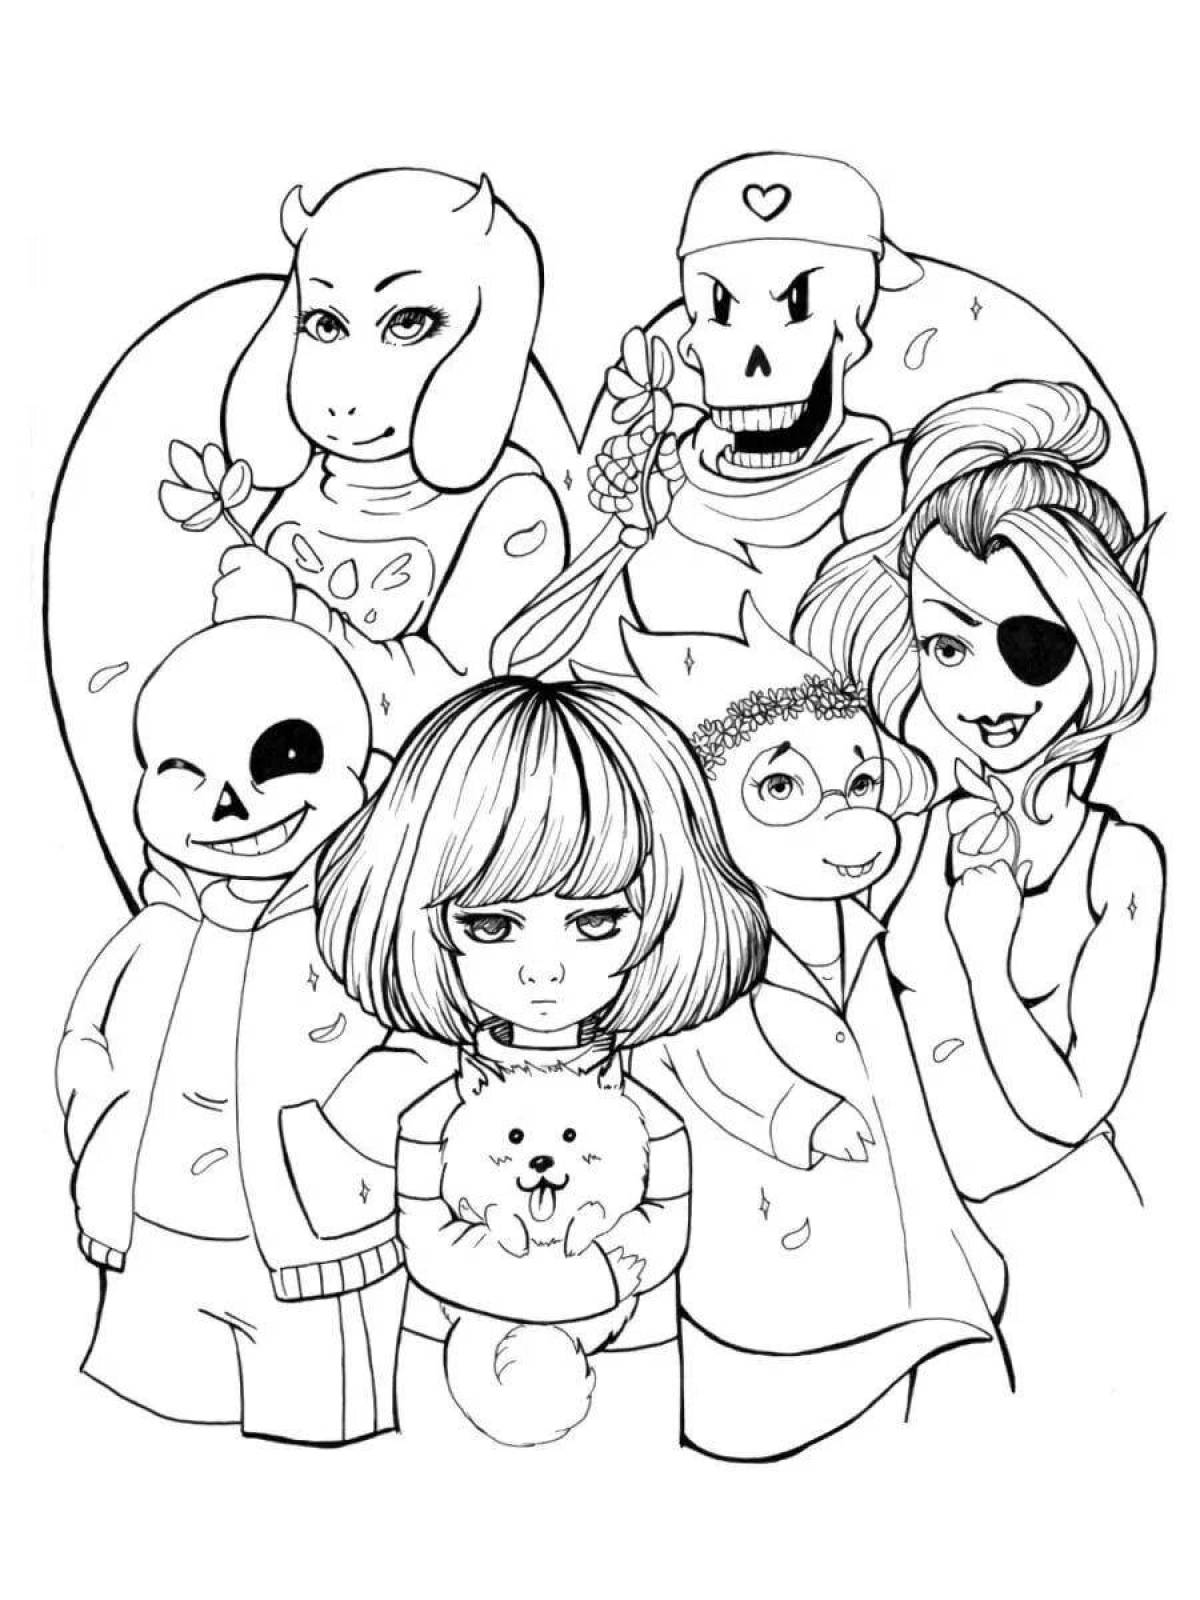 Chara's amazing coloring page